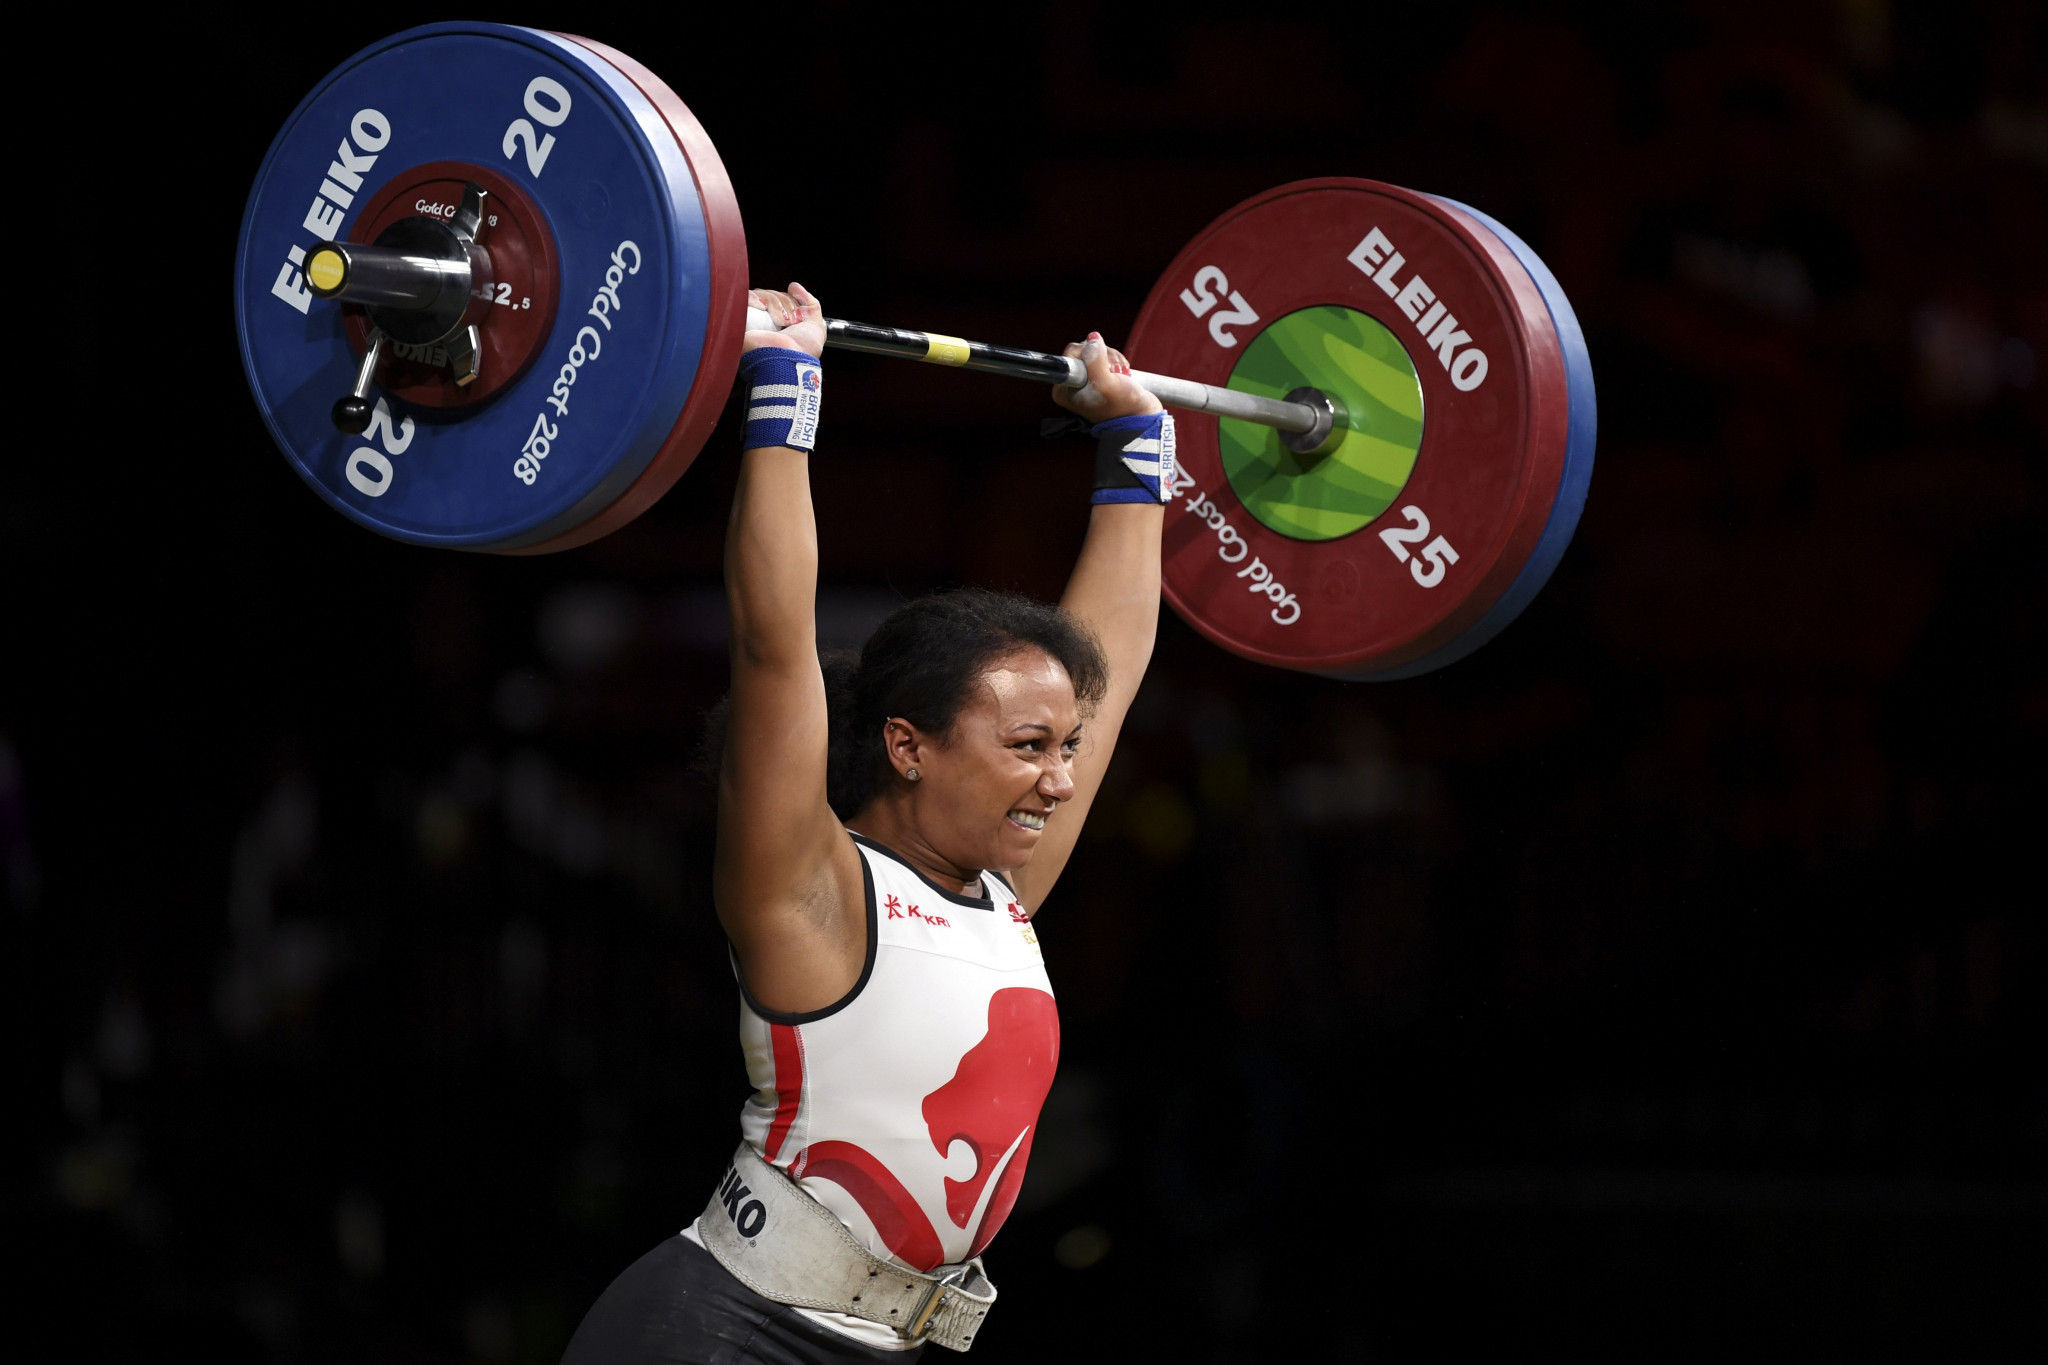 British weightlifters turn to crowdfunding after being told to fund own way to Tokyo 2020 